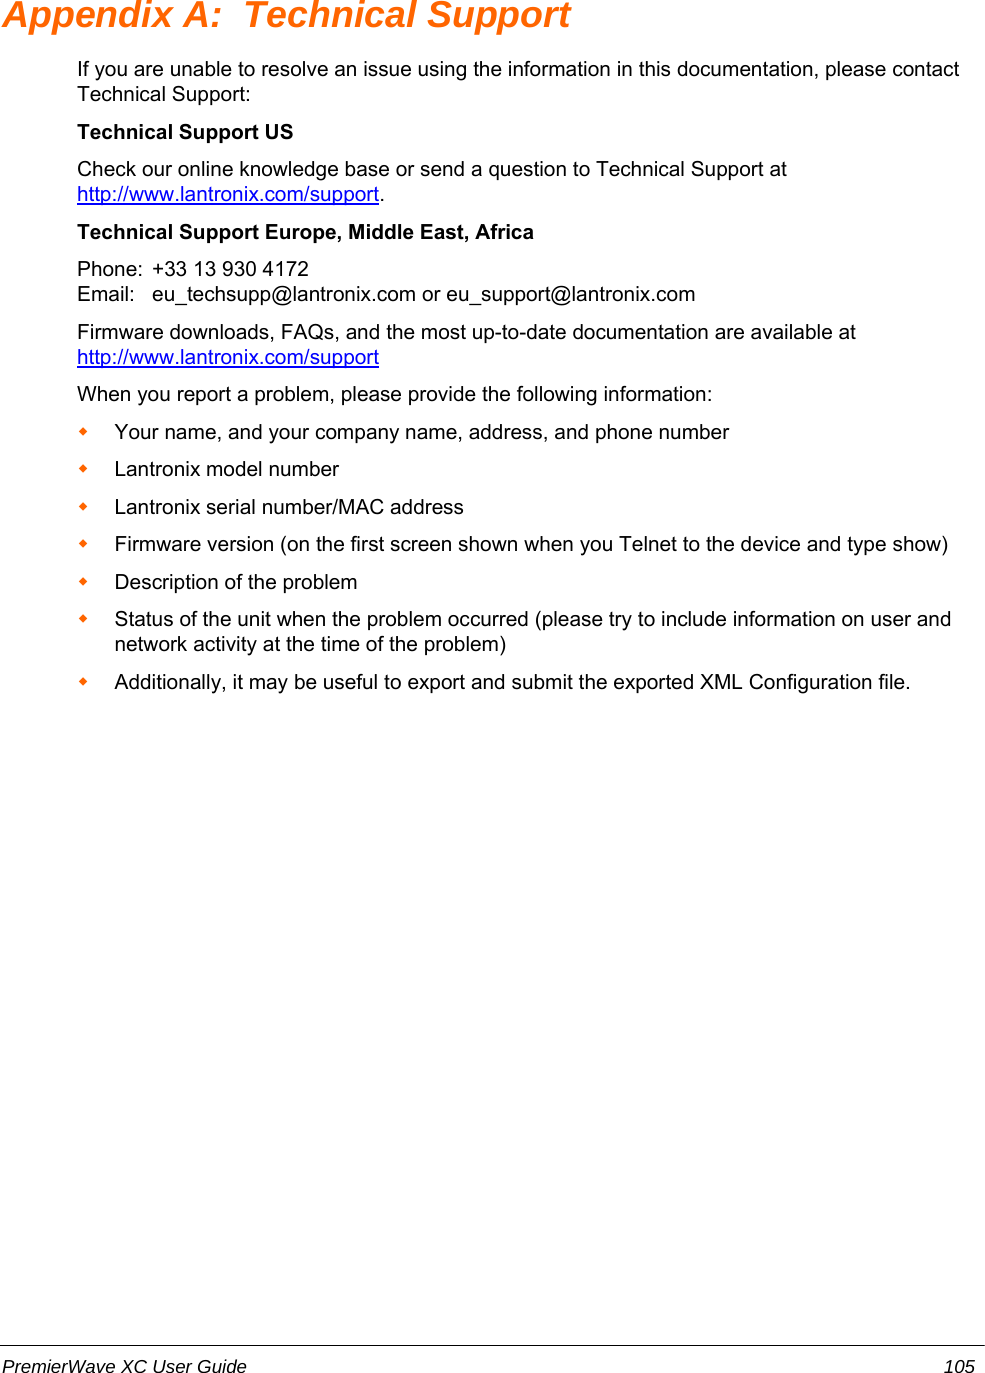 Appendix A:  Technical SupportIf you are unable to resolve an issue using the information in this documentation, please contactTechnical Support:Technical Support USCheck our online knowledge base or send a question to Technical Support at http://www.lantronix.com/support.Technical Support Europe, Middle East, AfricaPhone:  +33 13 930 4172        Email: eu_techsupp@lantronix.com or eu_support@lantronix.comFirmware downloads, FAQs, and the most up-to-date documentation are available at http://www.lantronix.com/supportWhen you report a problem, please provide the following information: Your name, and your company name, address, and phone numberLantronix model numberLantronix serial number/MAC addressFirmware version (on the first screen shown when you Telnet to the device and type show)Description of the problemStatus of the unit when the problem occurred (please try to include information on user andnetwork activity at the time of the problem) Additionally, it may be useful to export and submit the exported XML Configuration file.PremierWave XC User Guide 105